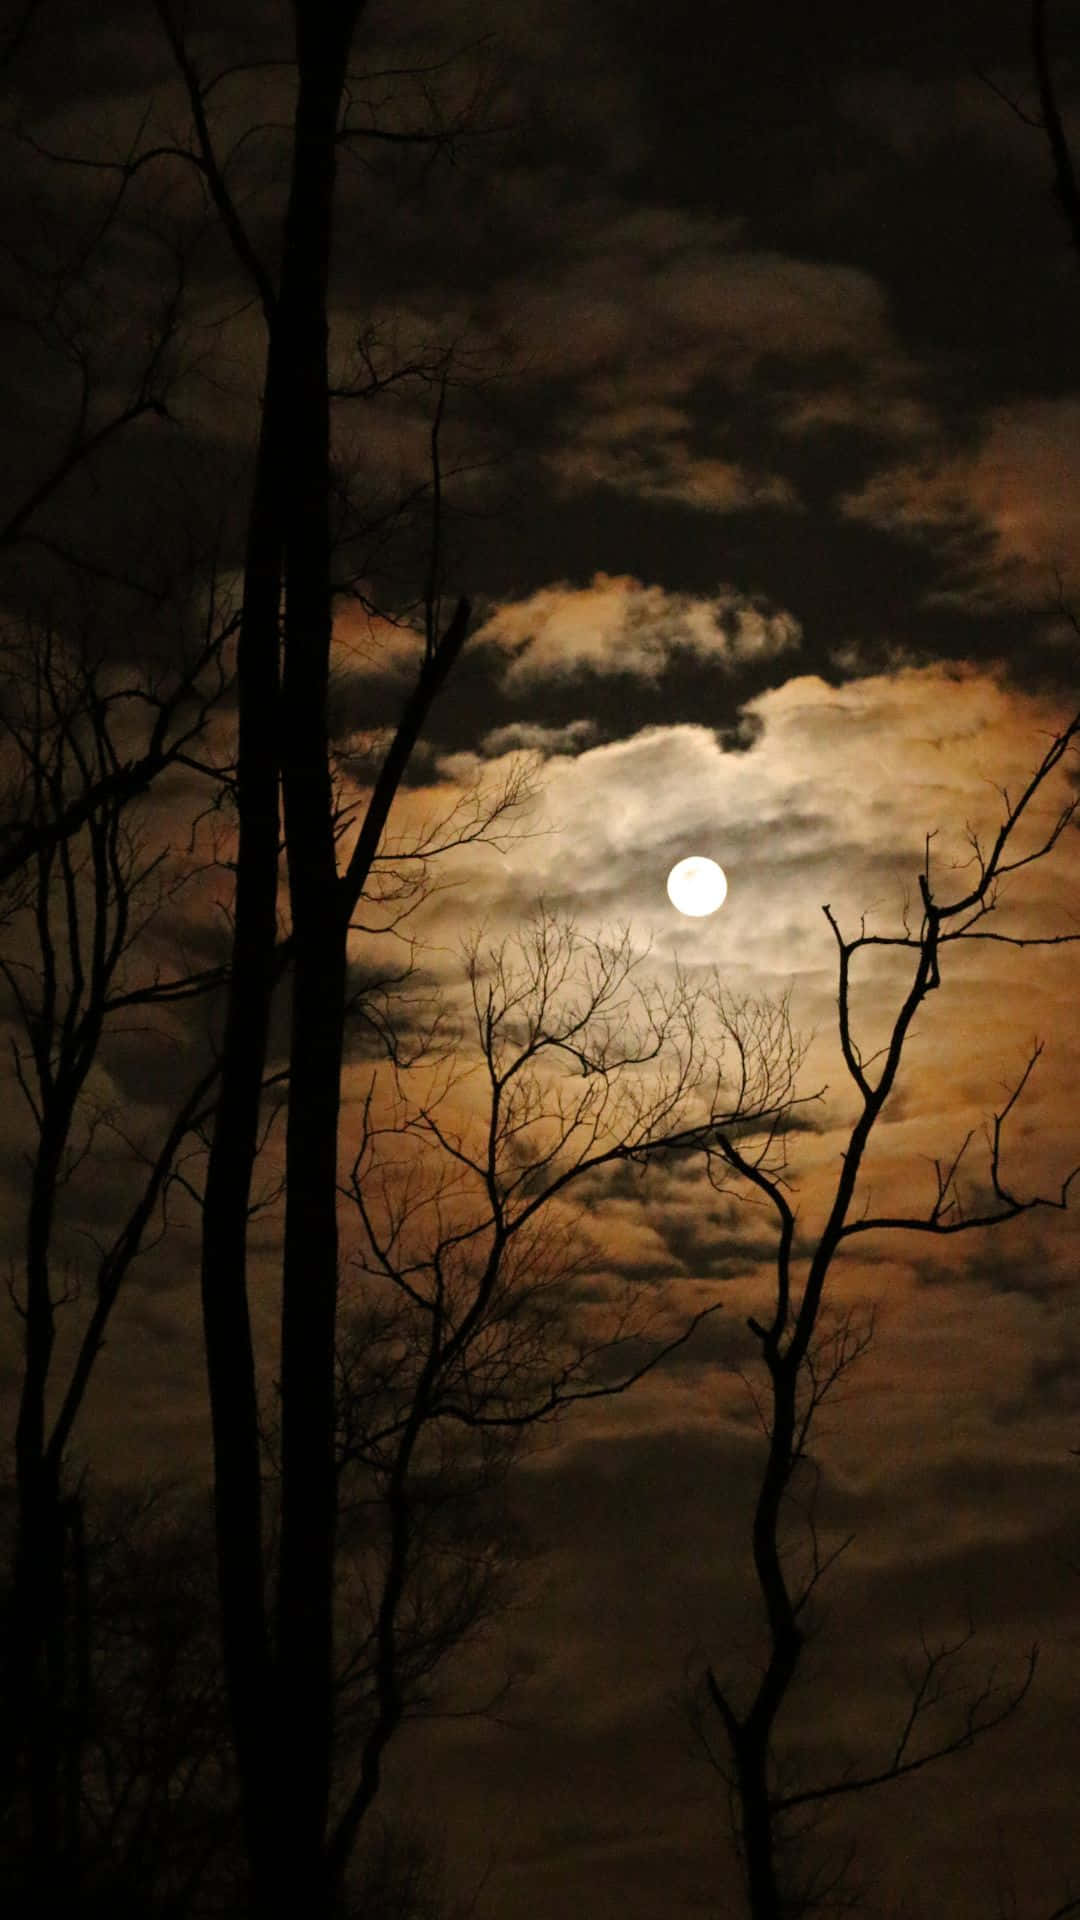 "The beauty of a full moon night" Wallpaper